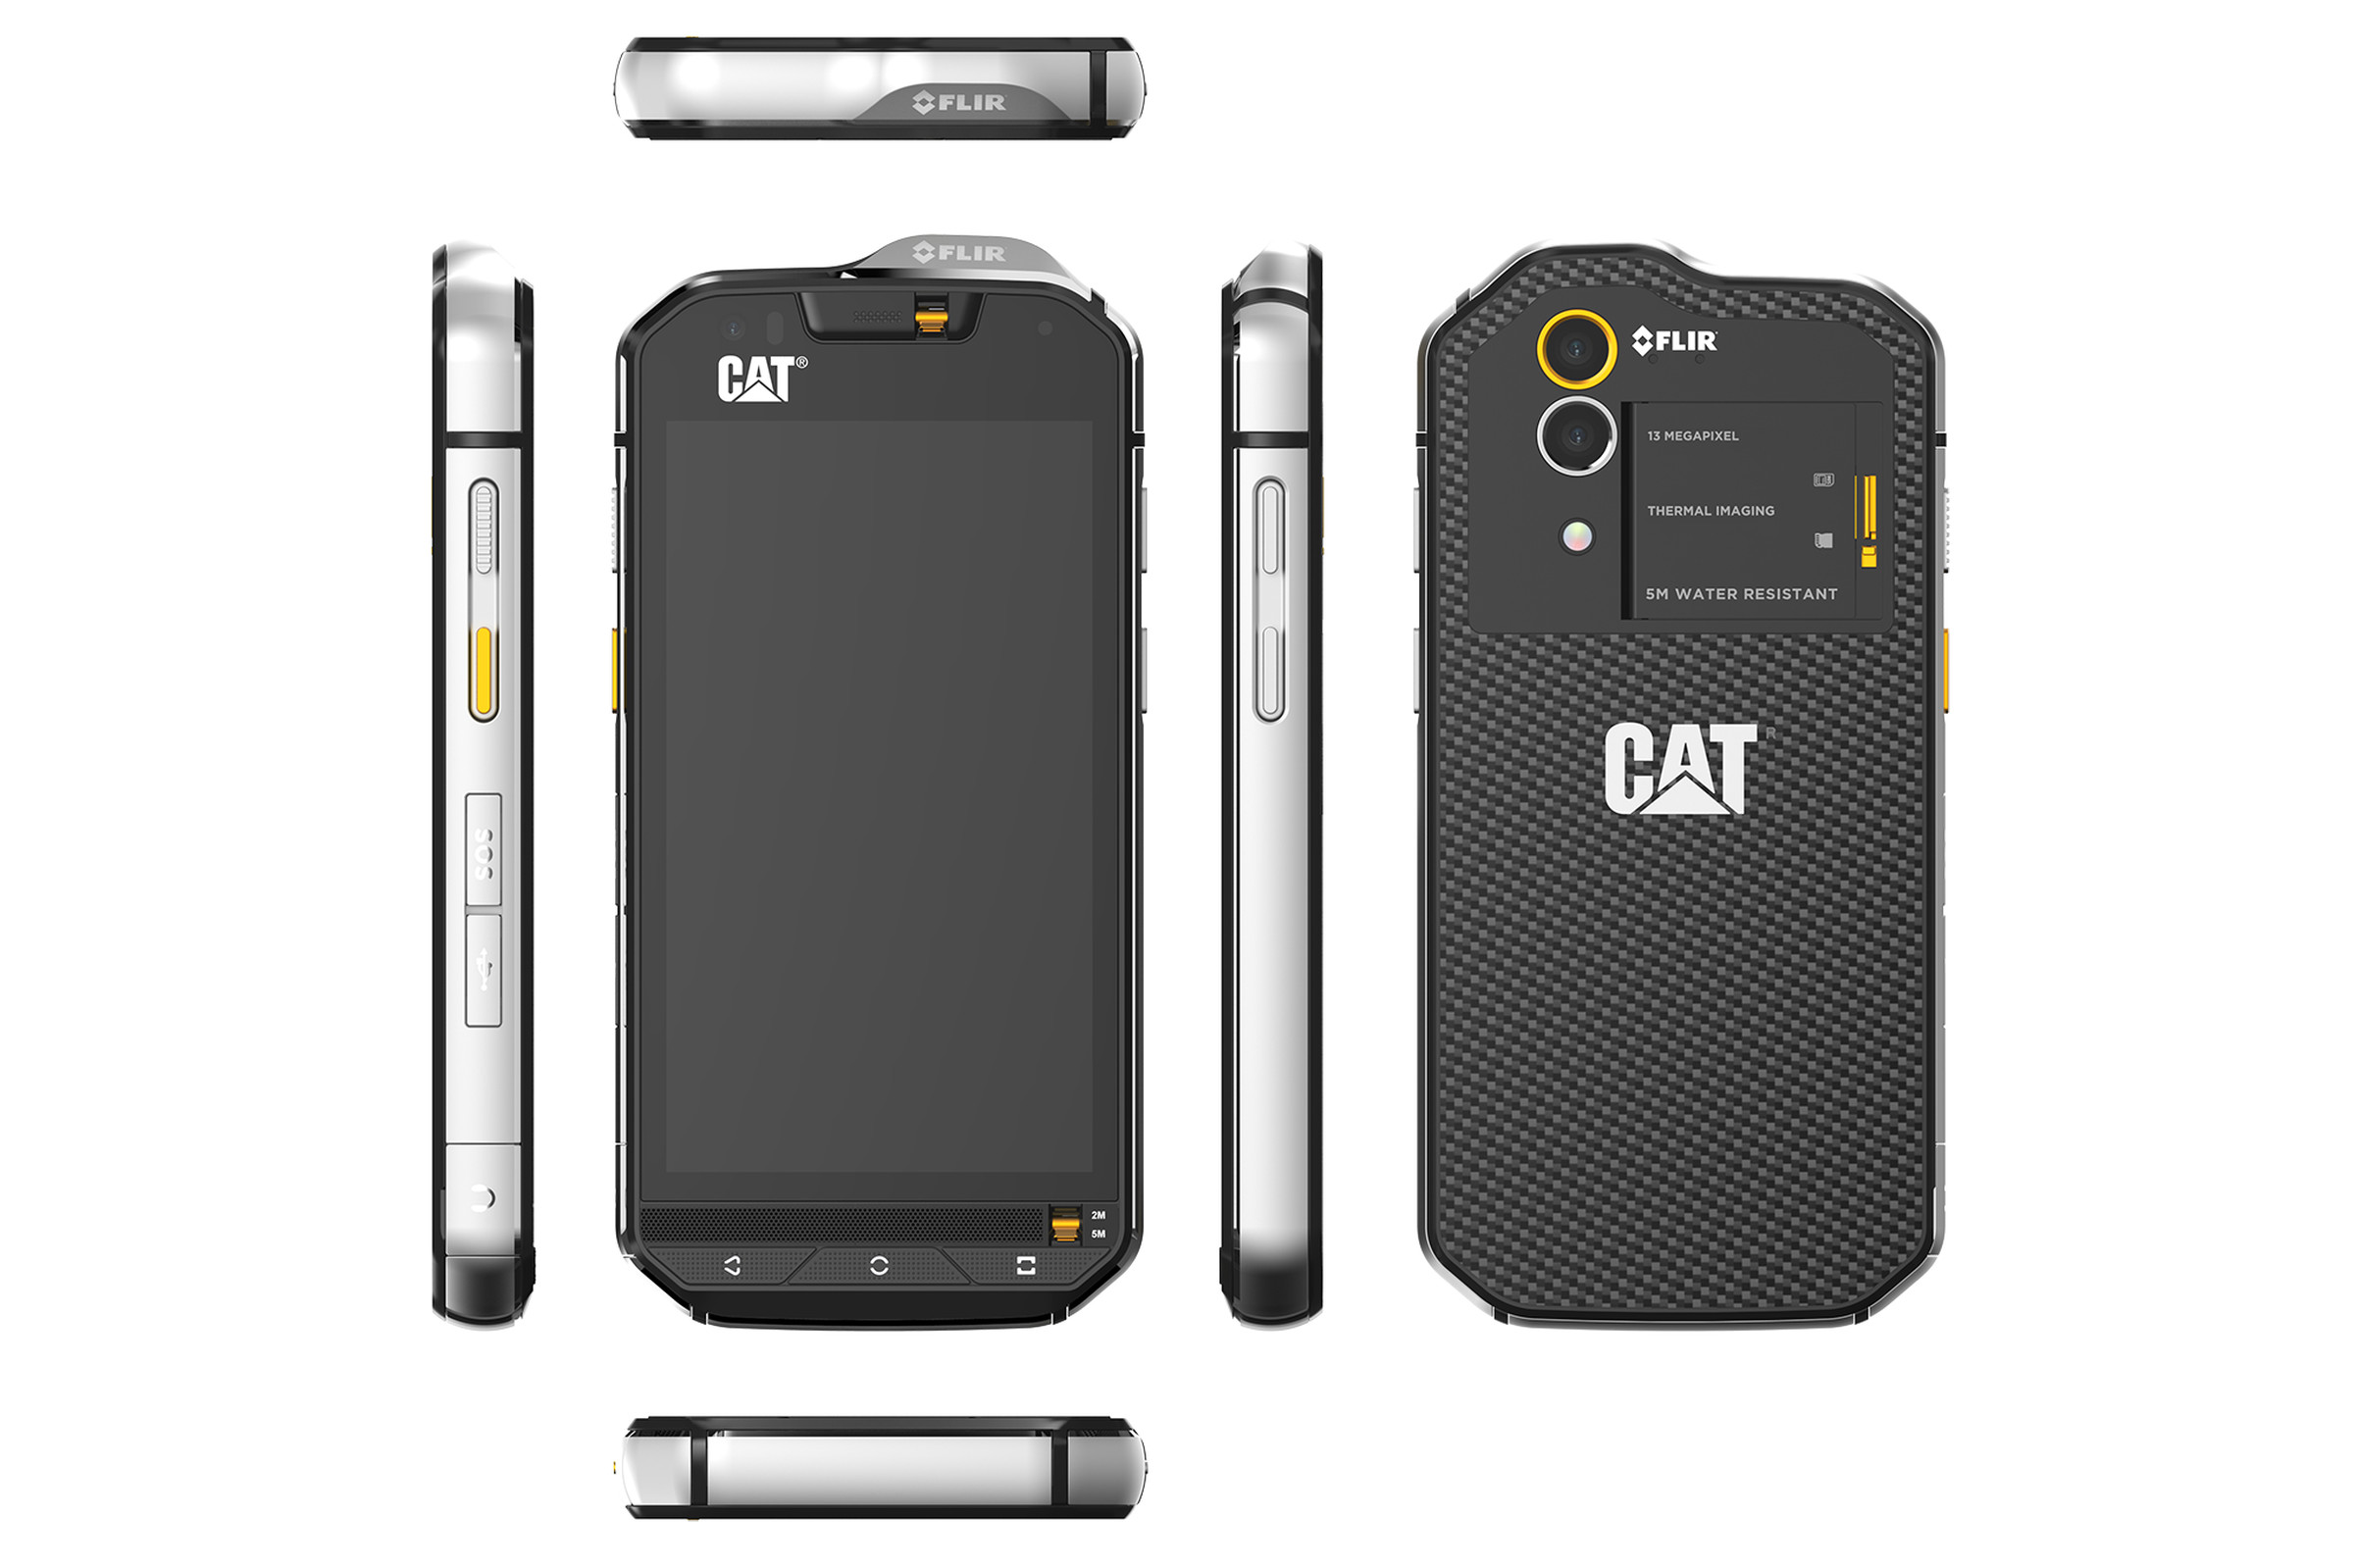 Cat S60 rugged Android smartphone